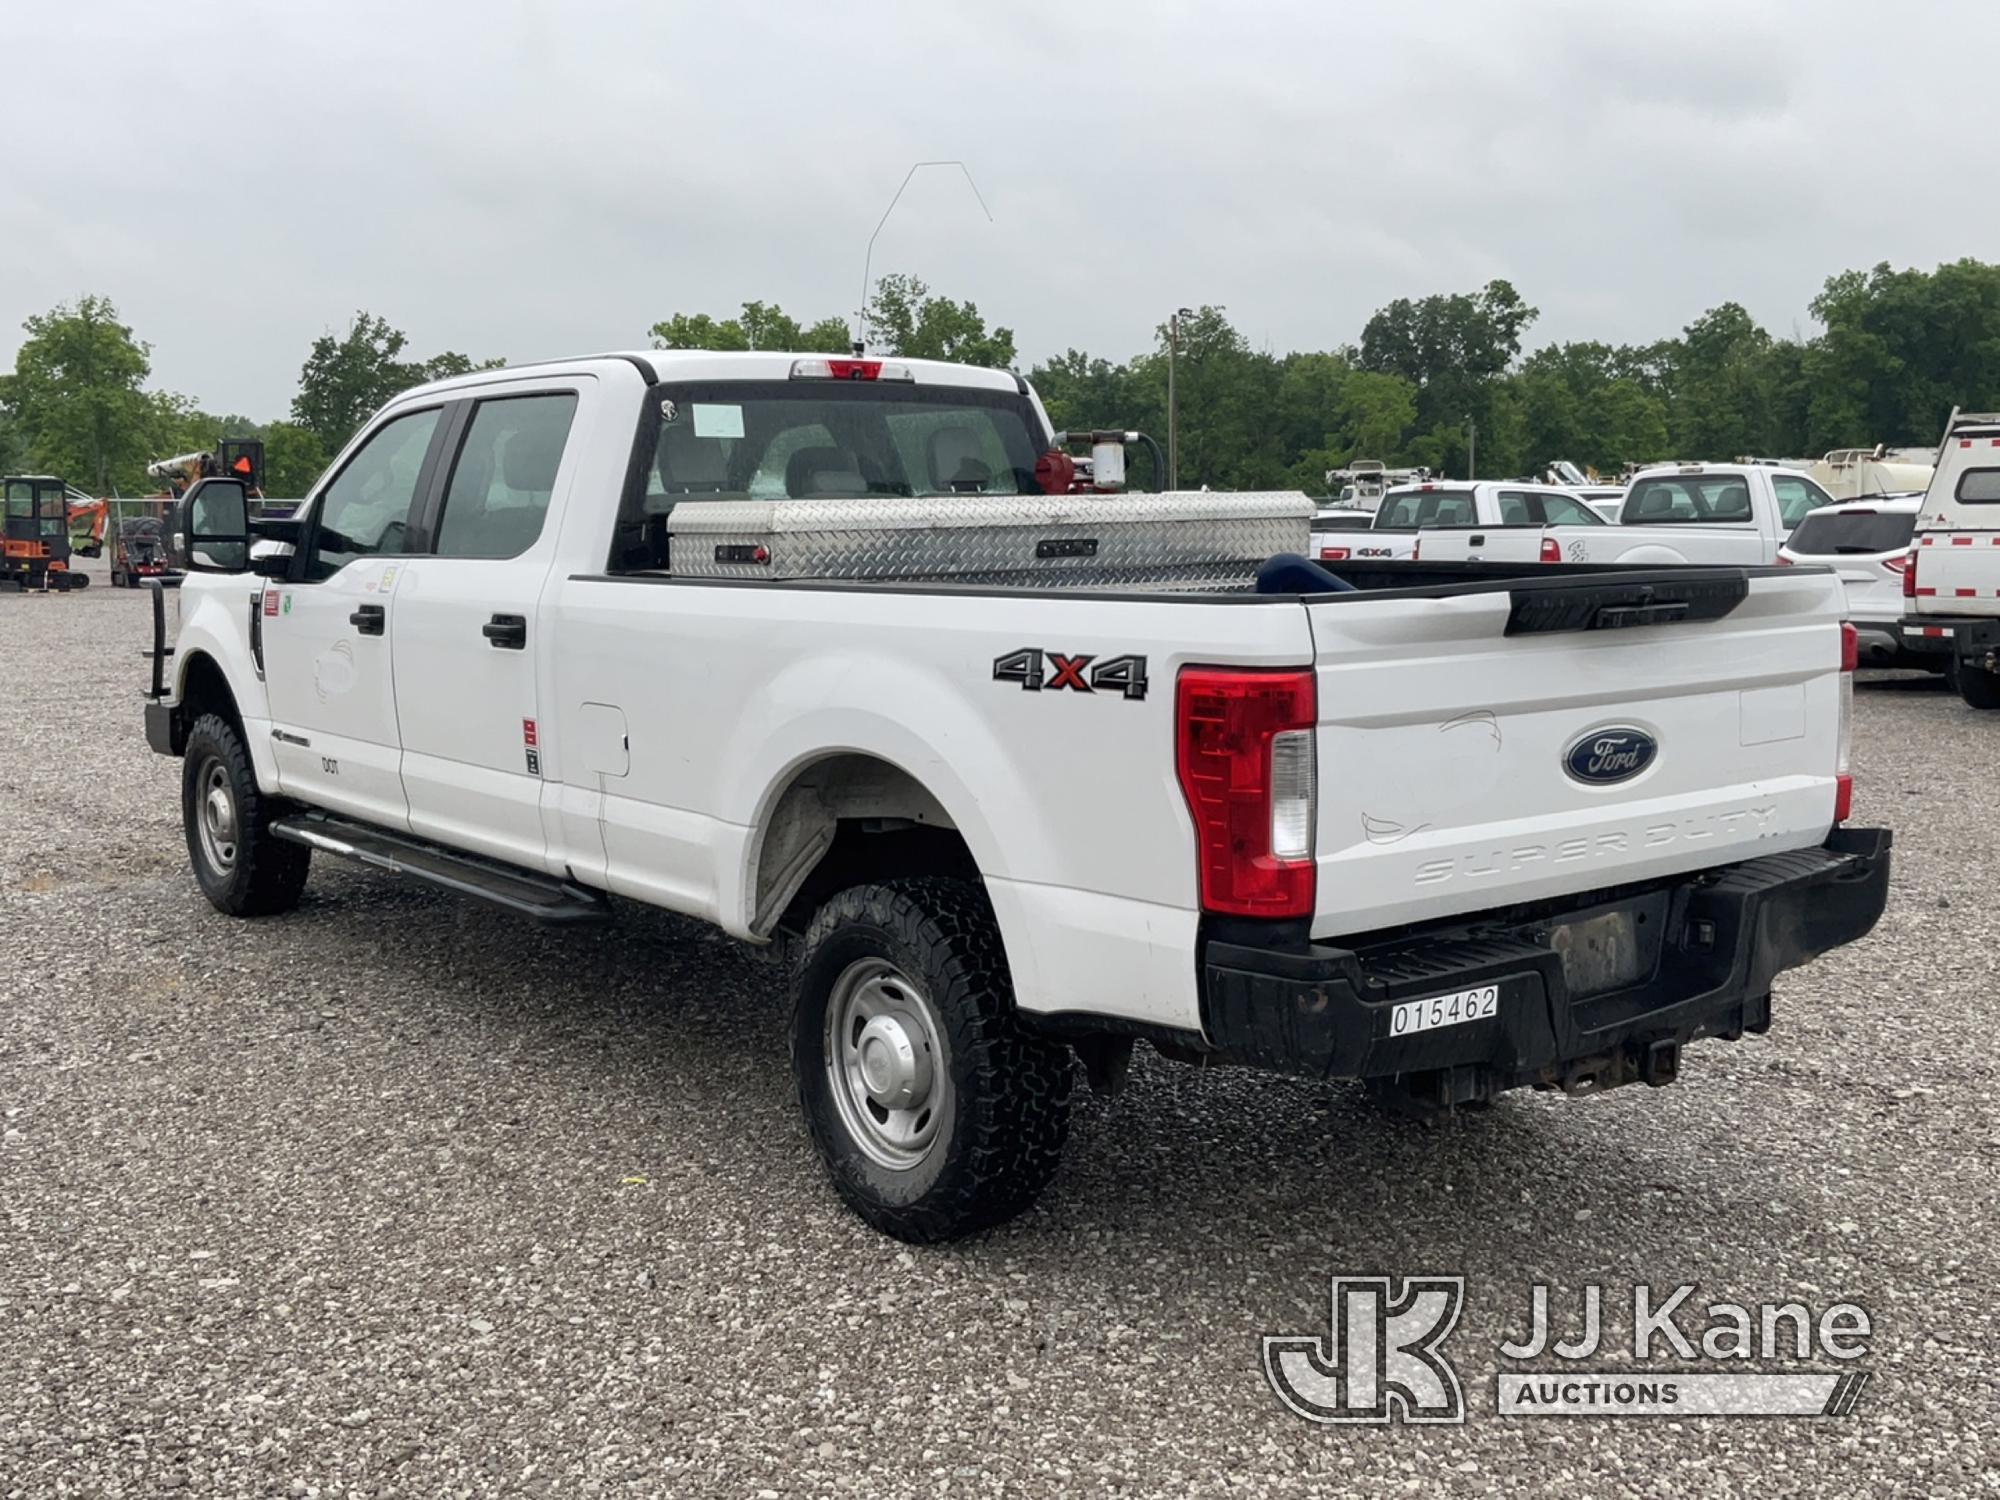 (Verona, KY) 2018 Ford F250 4x4 Crew-Cab Pickup Truck Runs & Moves) (Check Engine Light On, Exhaust